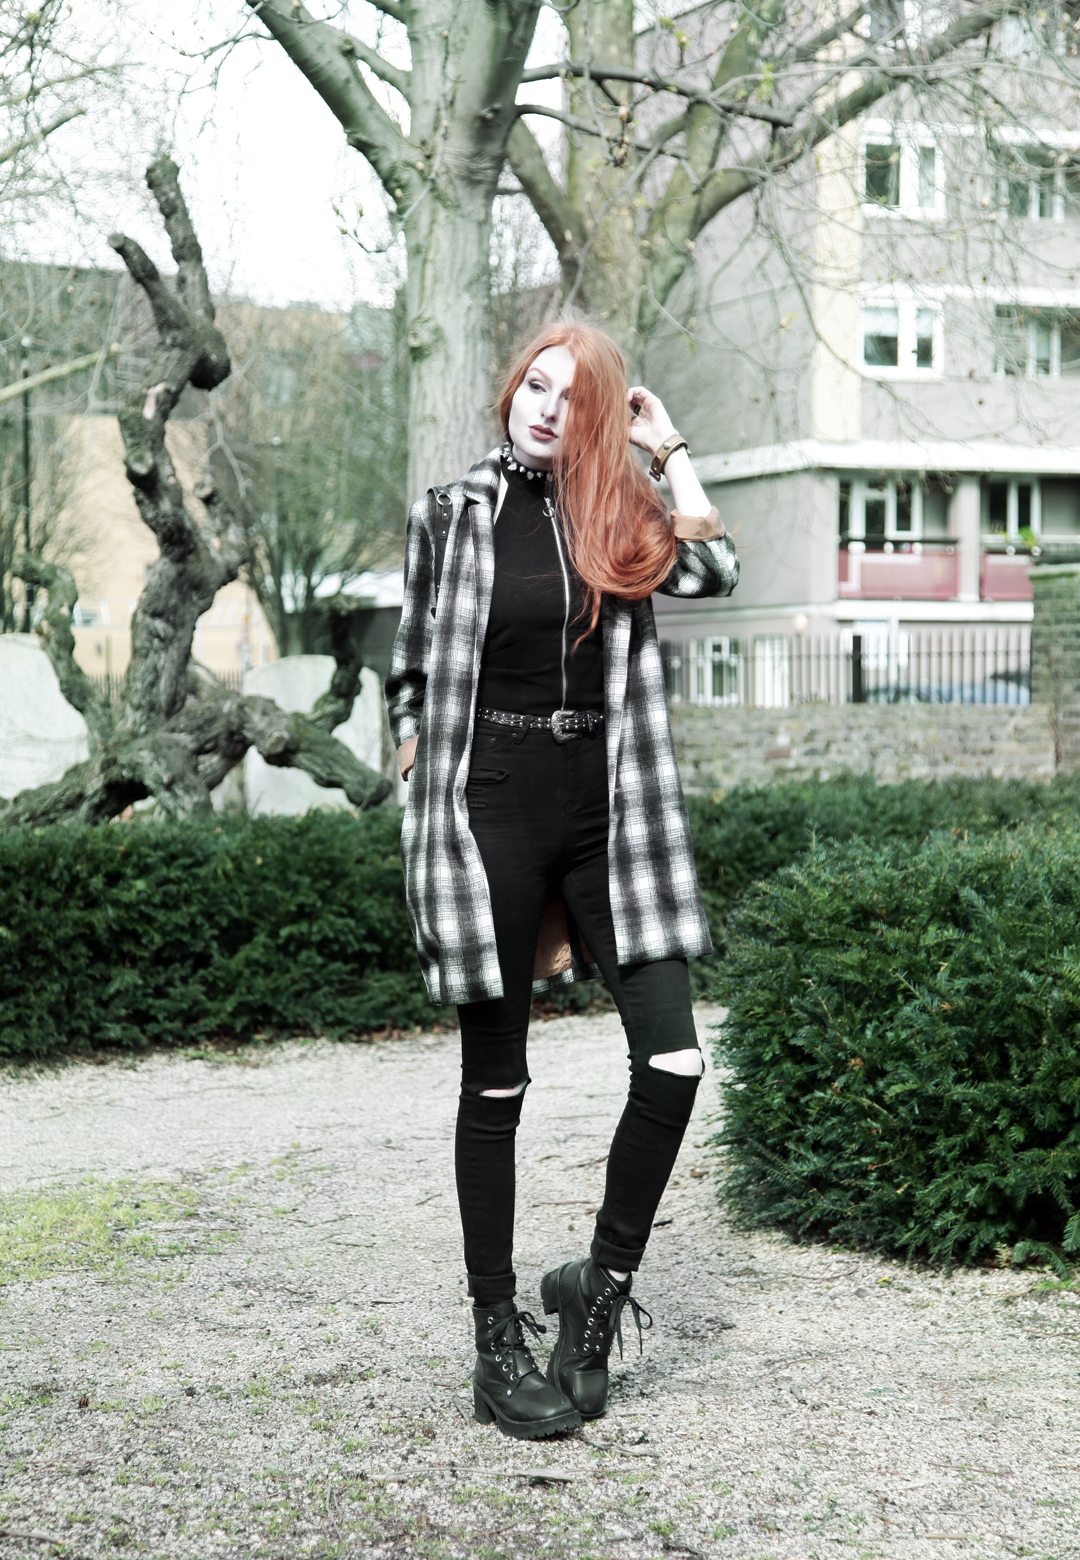 Olivia Emily wears Brave Soul Plaid Overcoat, Asos Black Zip Halter Top, Asos Ridley Ripped Jeans, Unif Dedi Boots and Unif Bound Mini Backpack